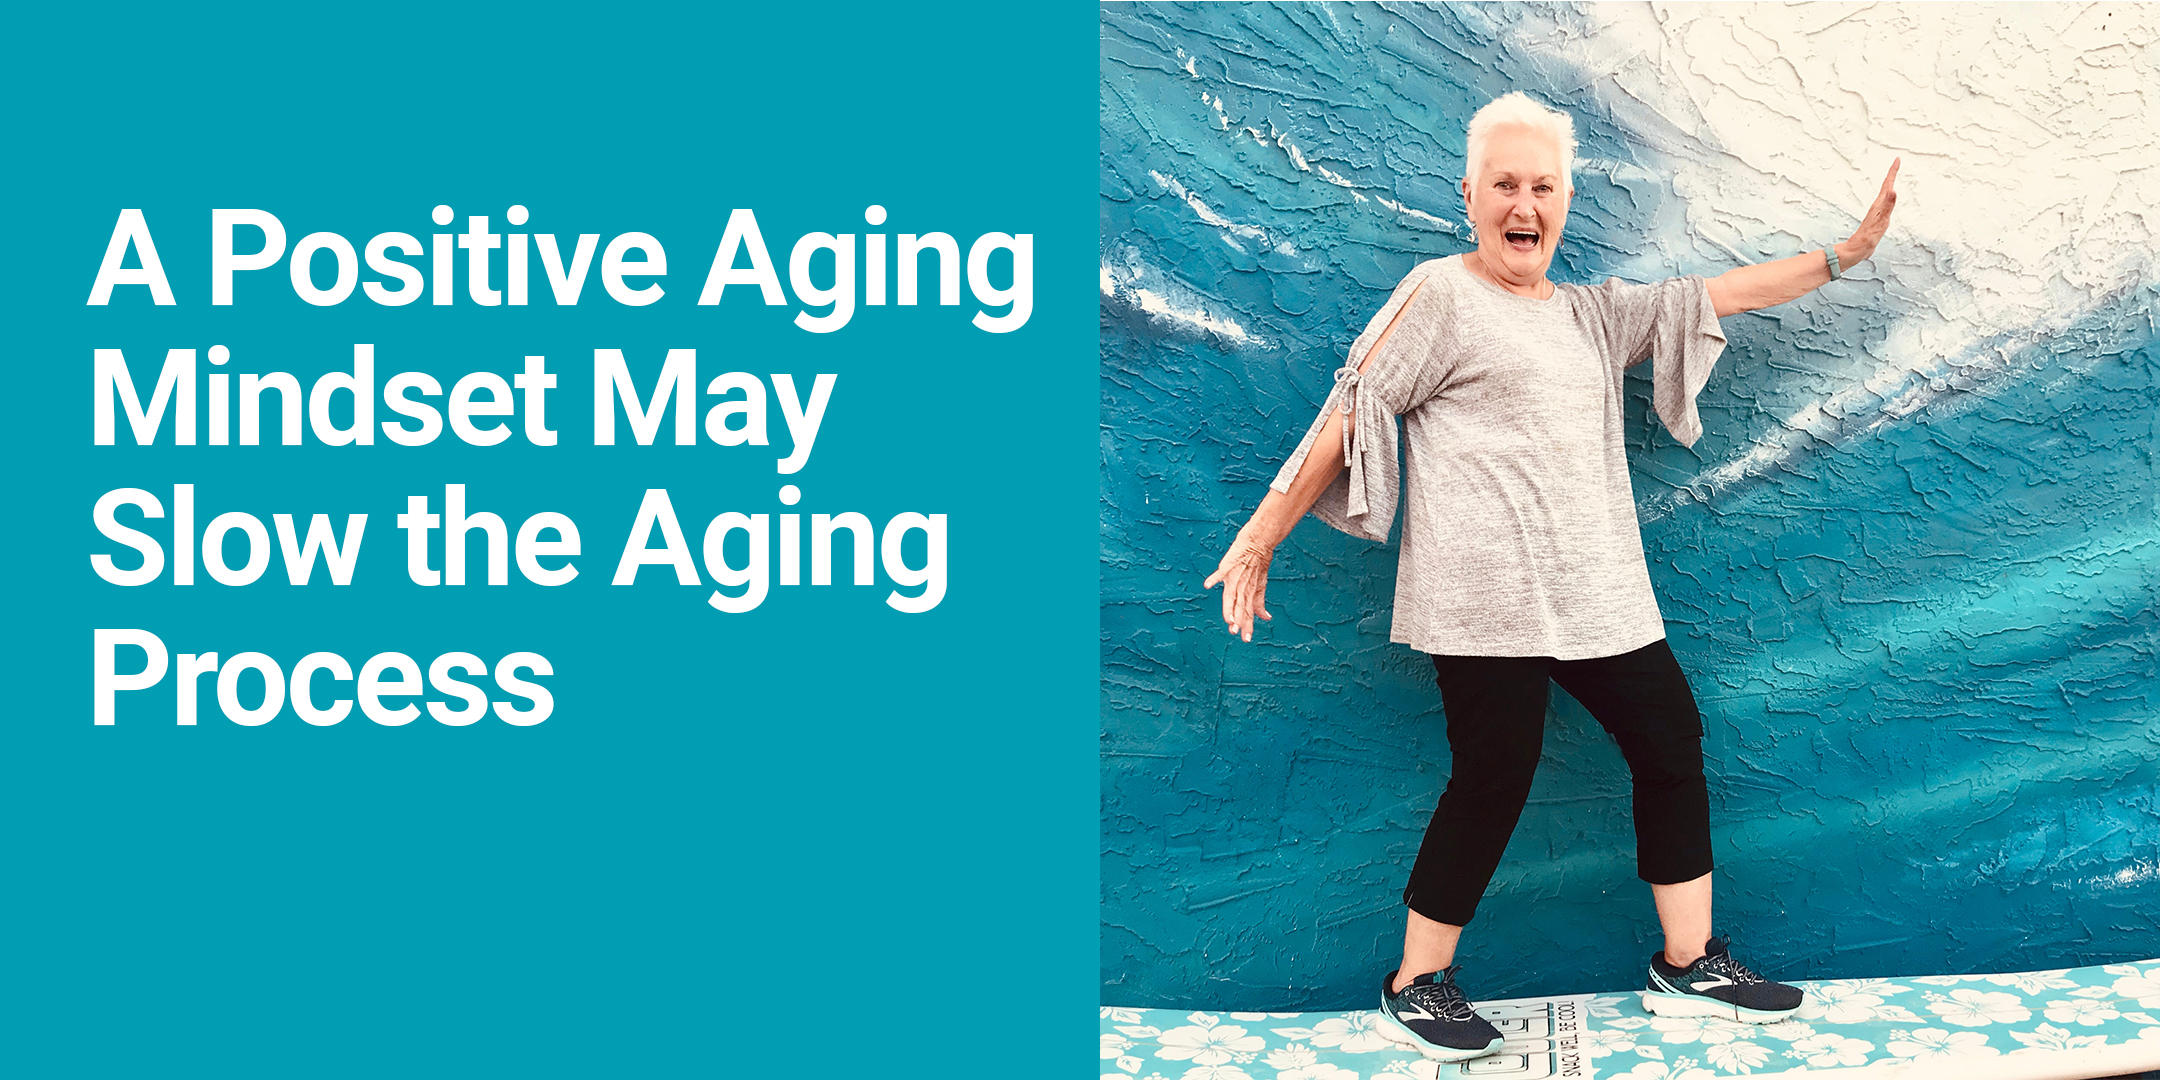 A positive aging mindset may slow the aging process